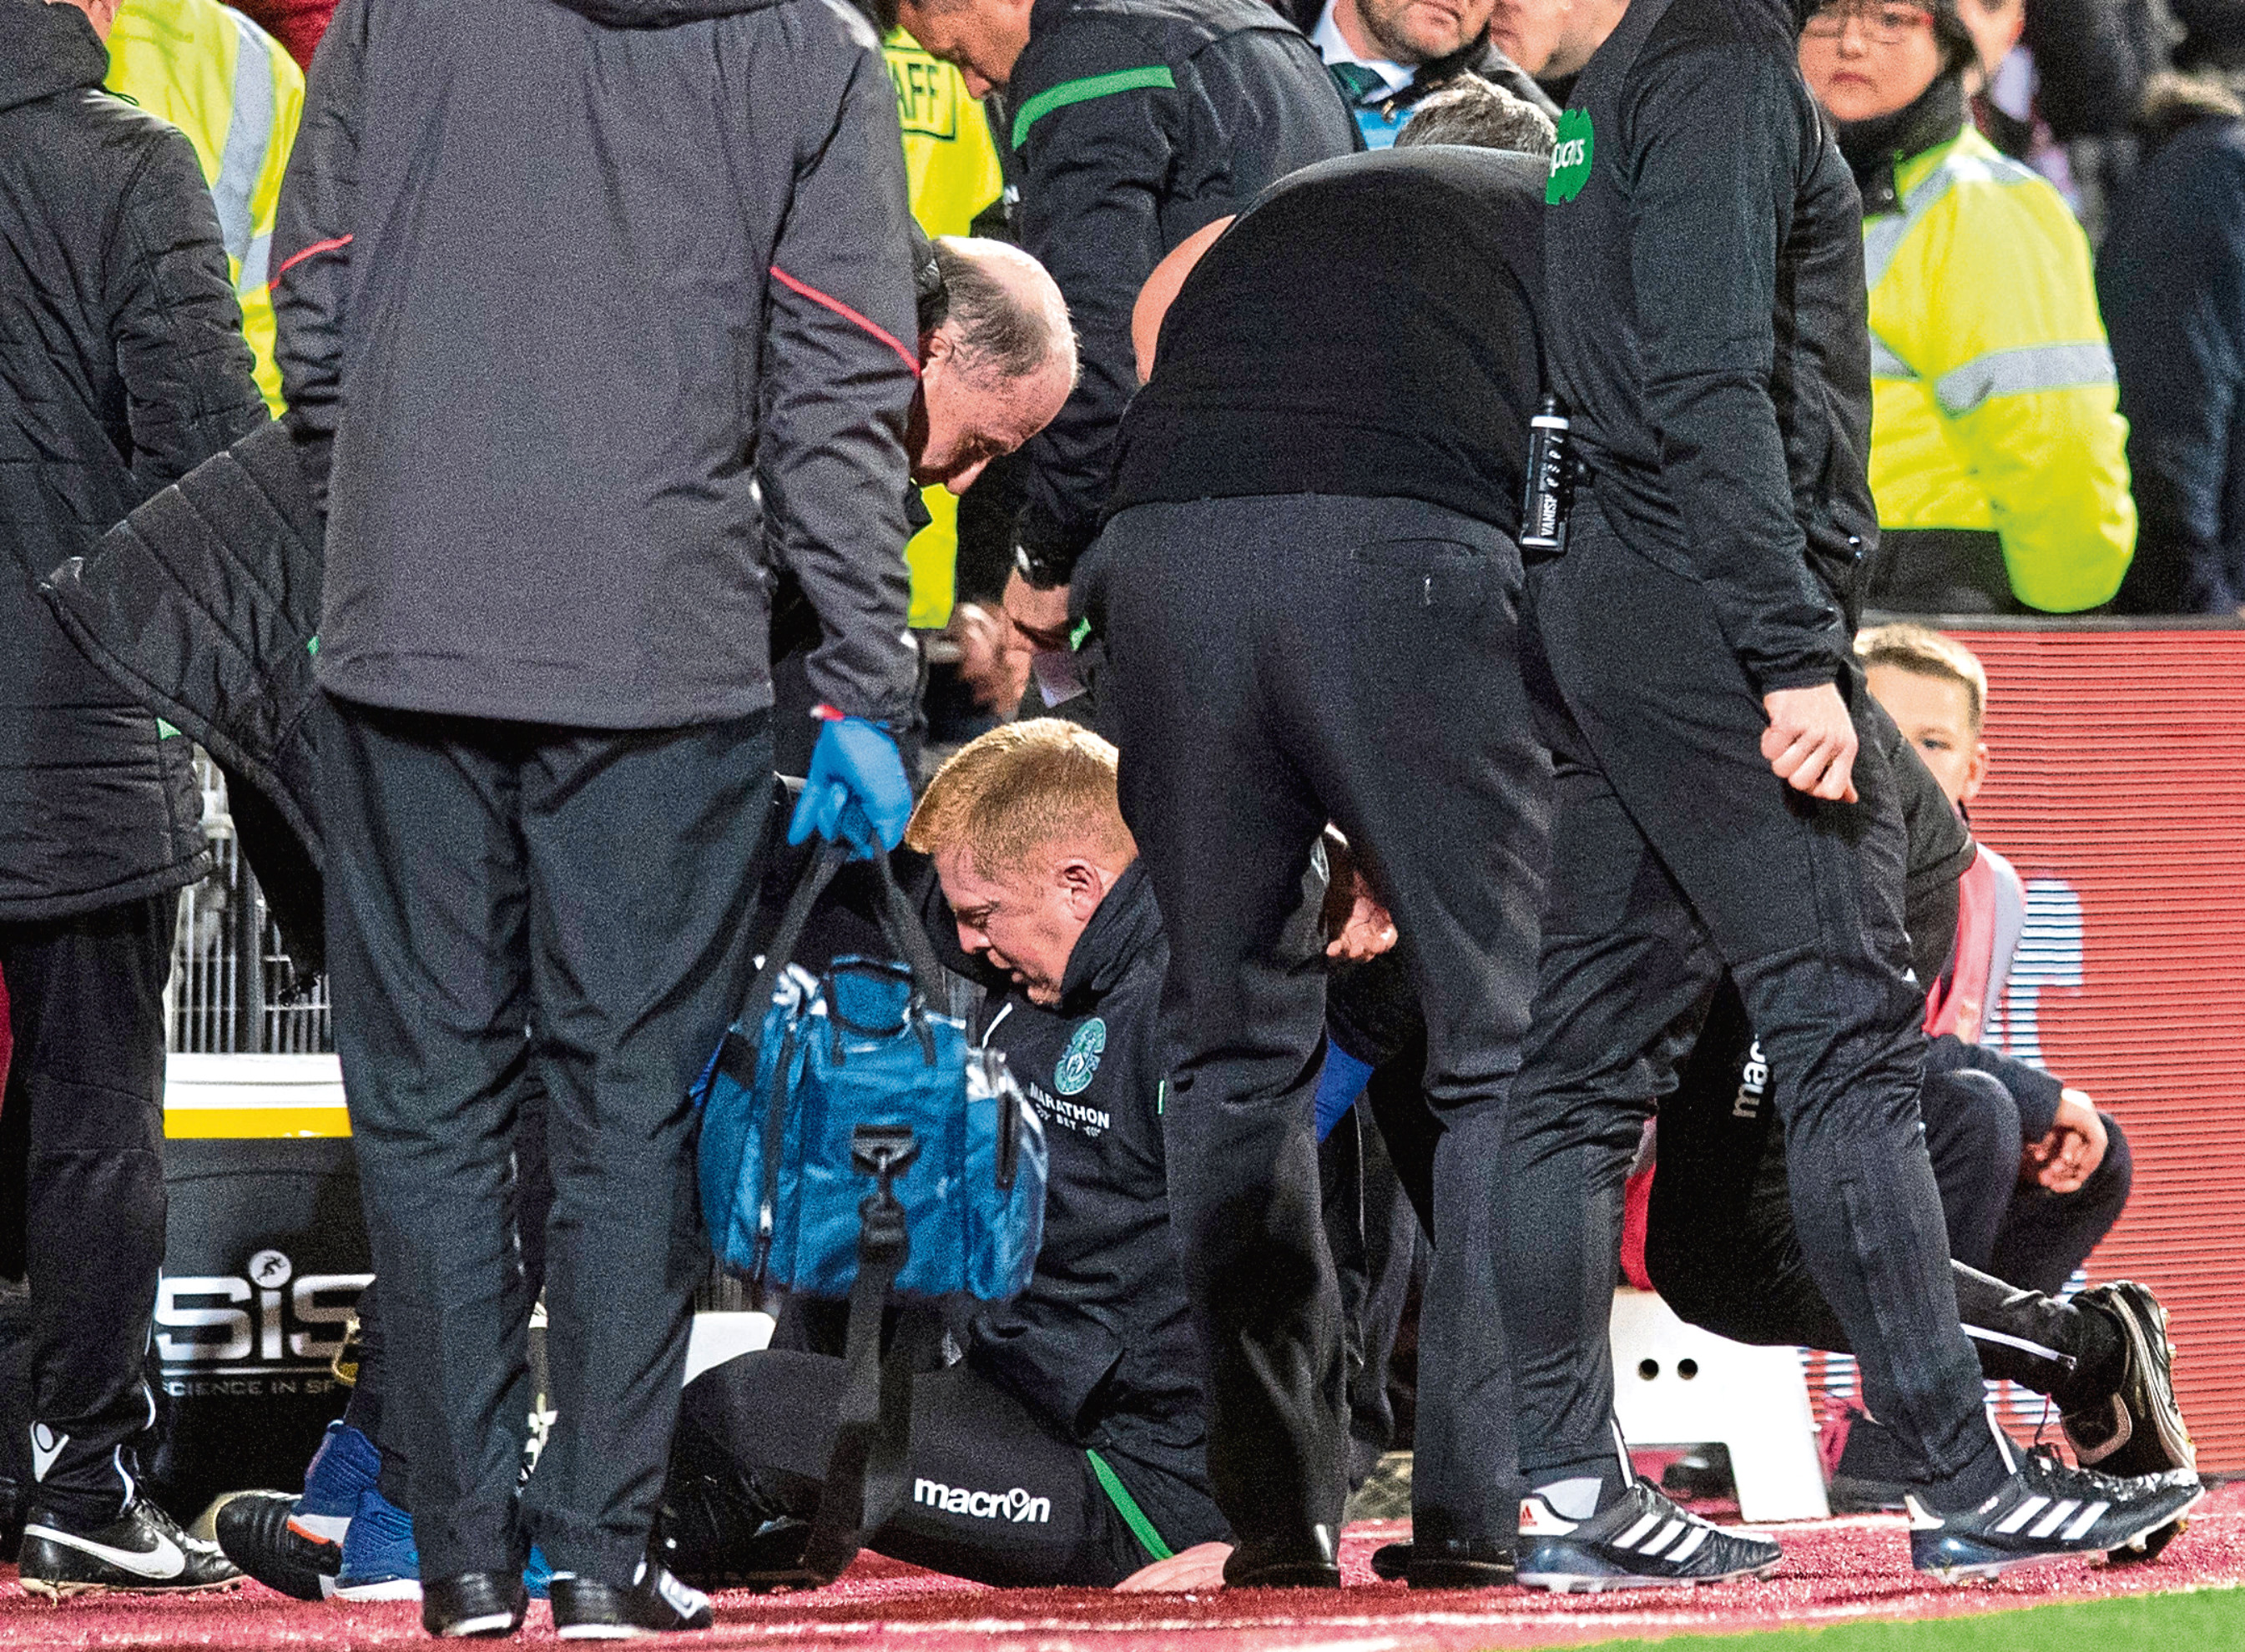 Hibernian manager Neil Lennon is helped to his feet by Hearts manager Craig Levein and a member of the Hibernian backroom staff after appearing to be struct by an object from the crowd during the Edinburgh derby.